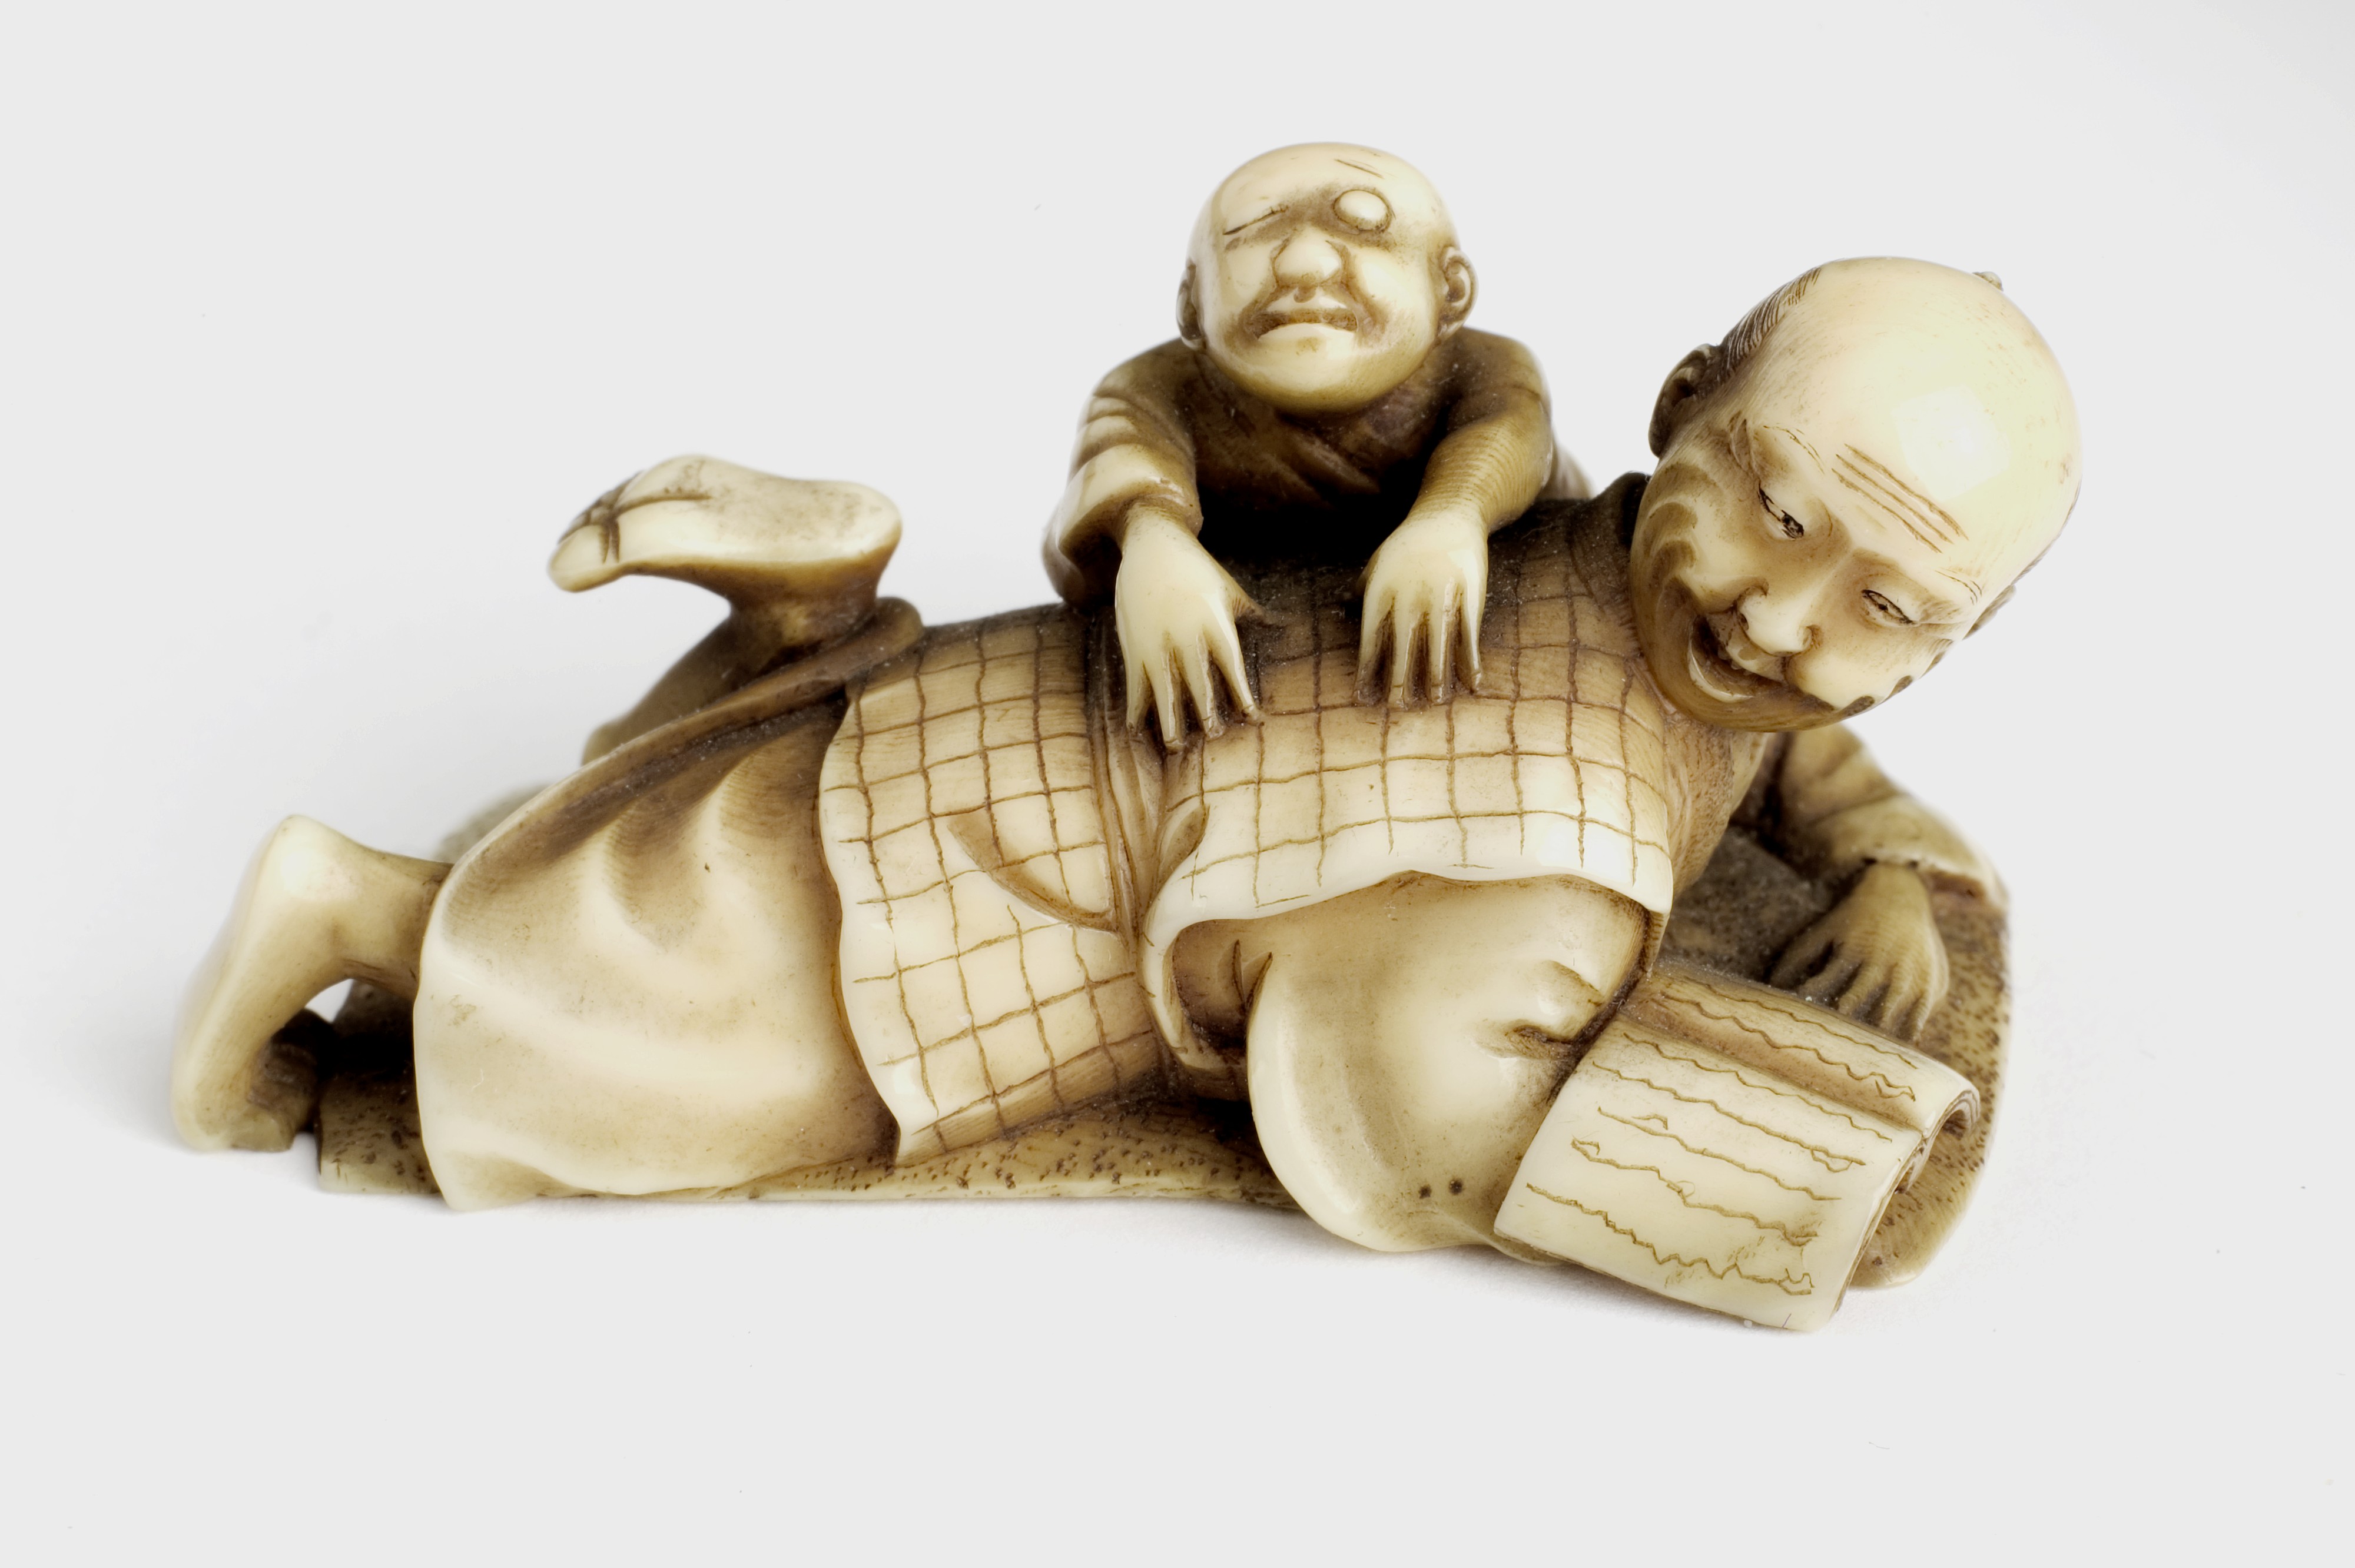 L0058581 Ivory figure of man massaging the back of another man. Japan